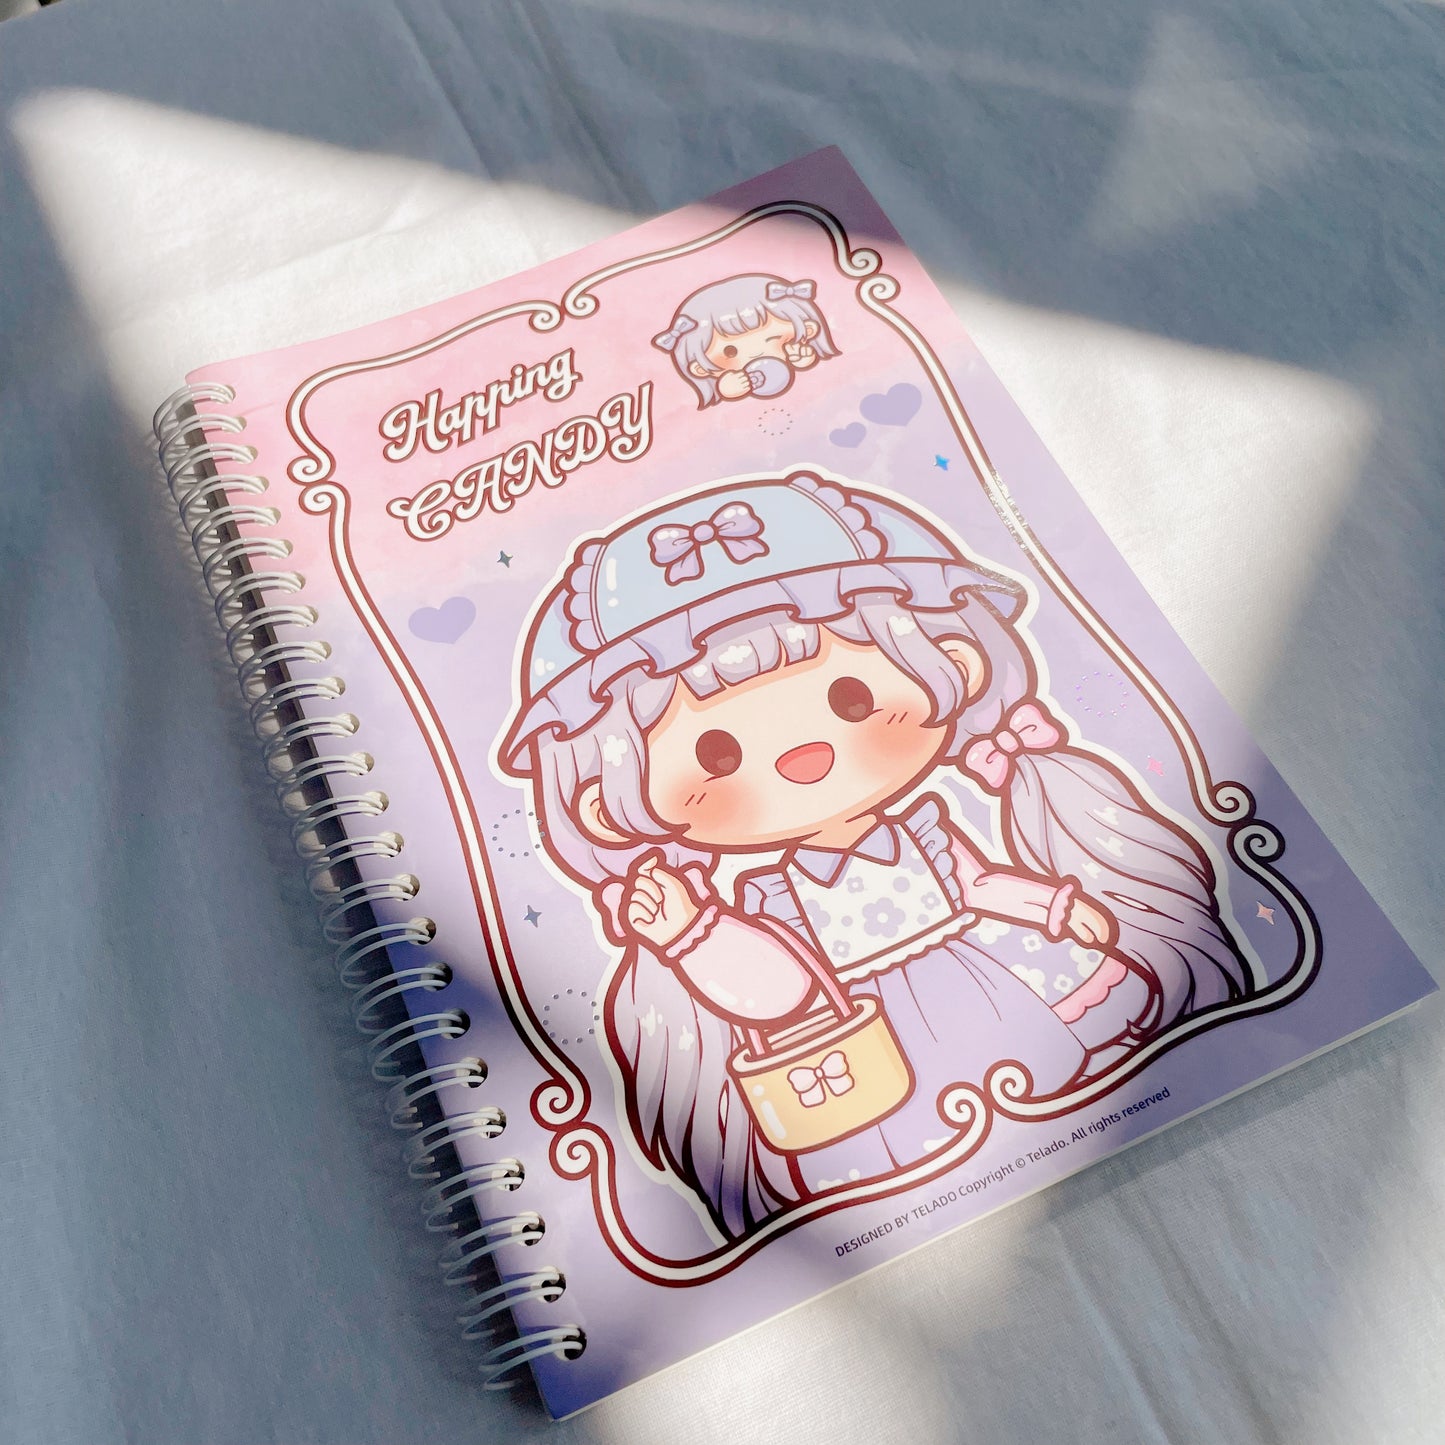 Happing Candy Stickerbook